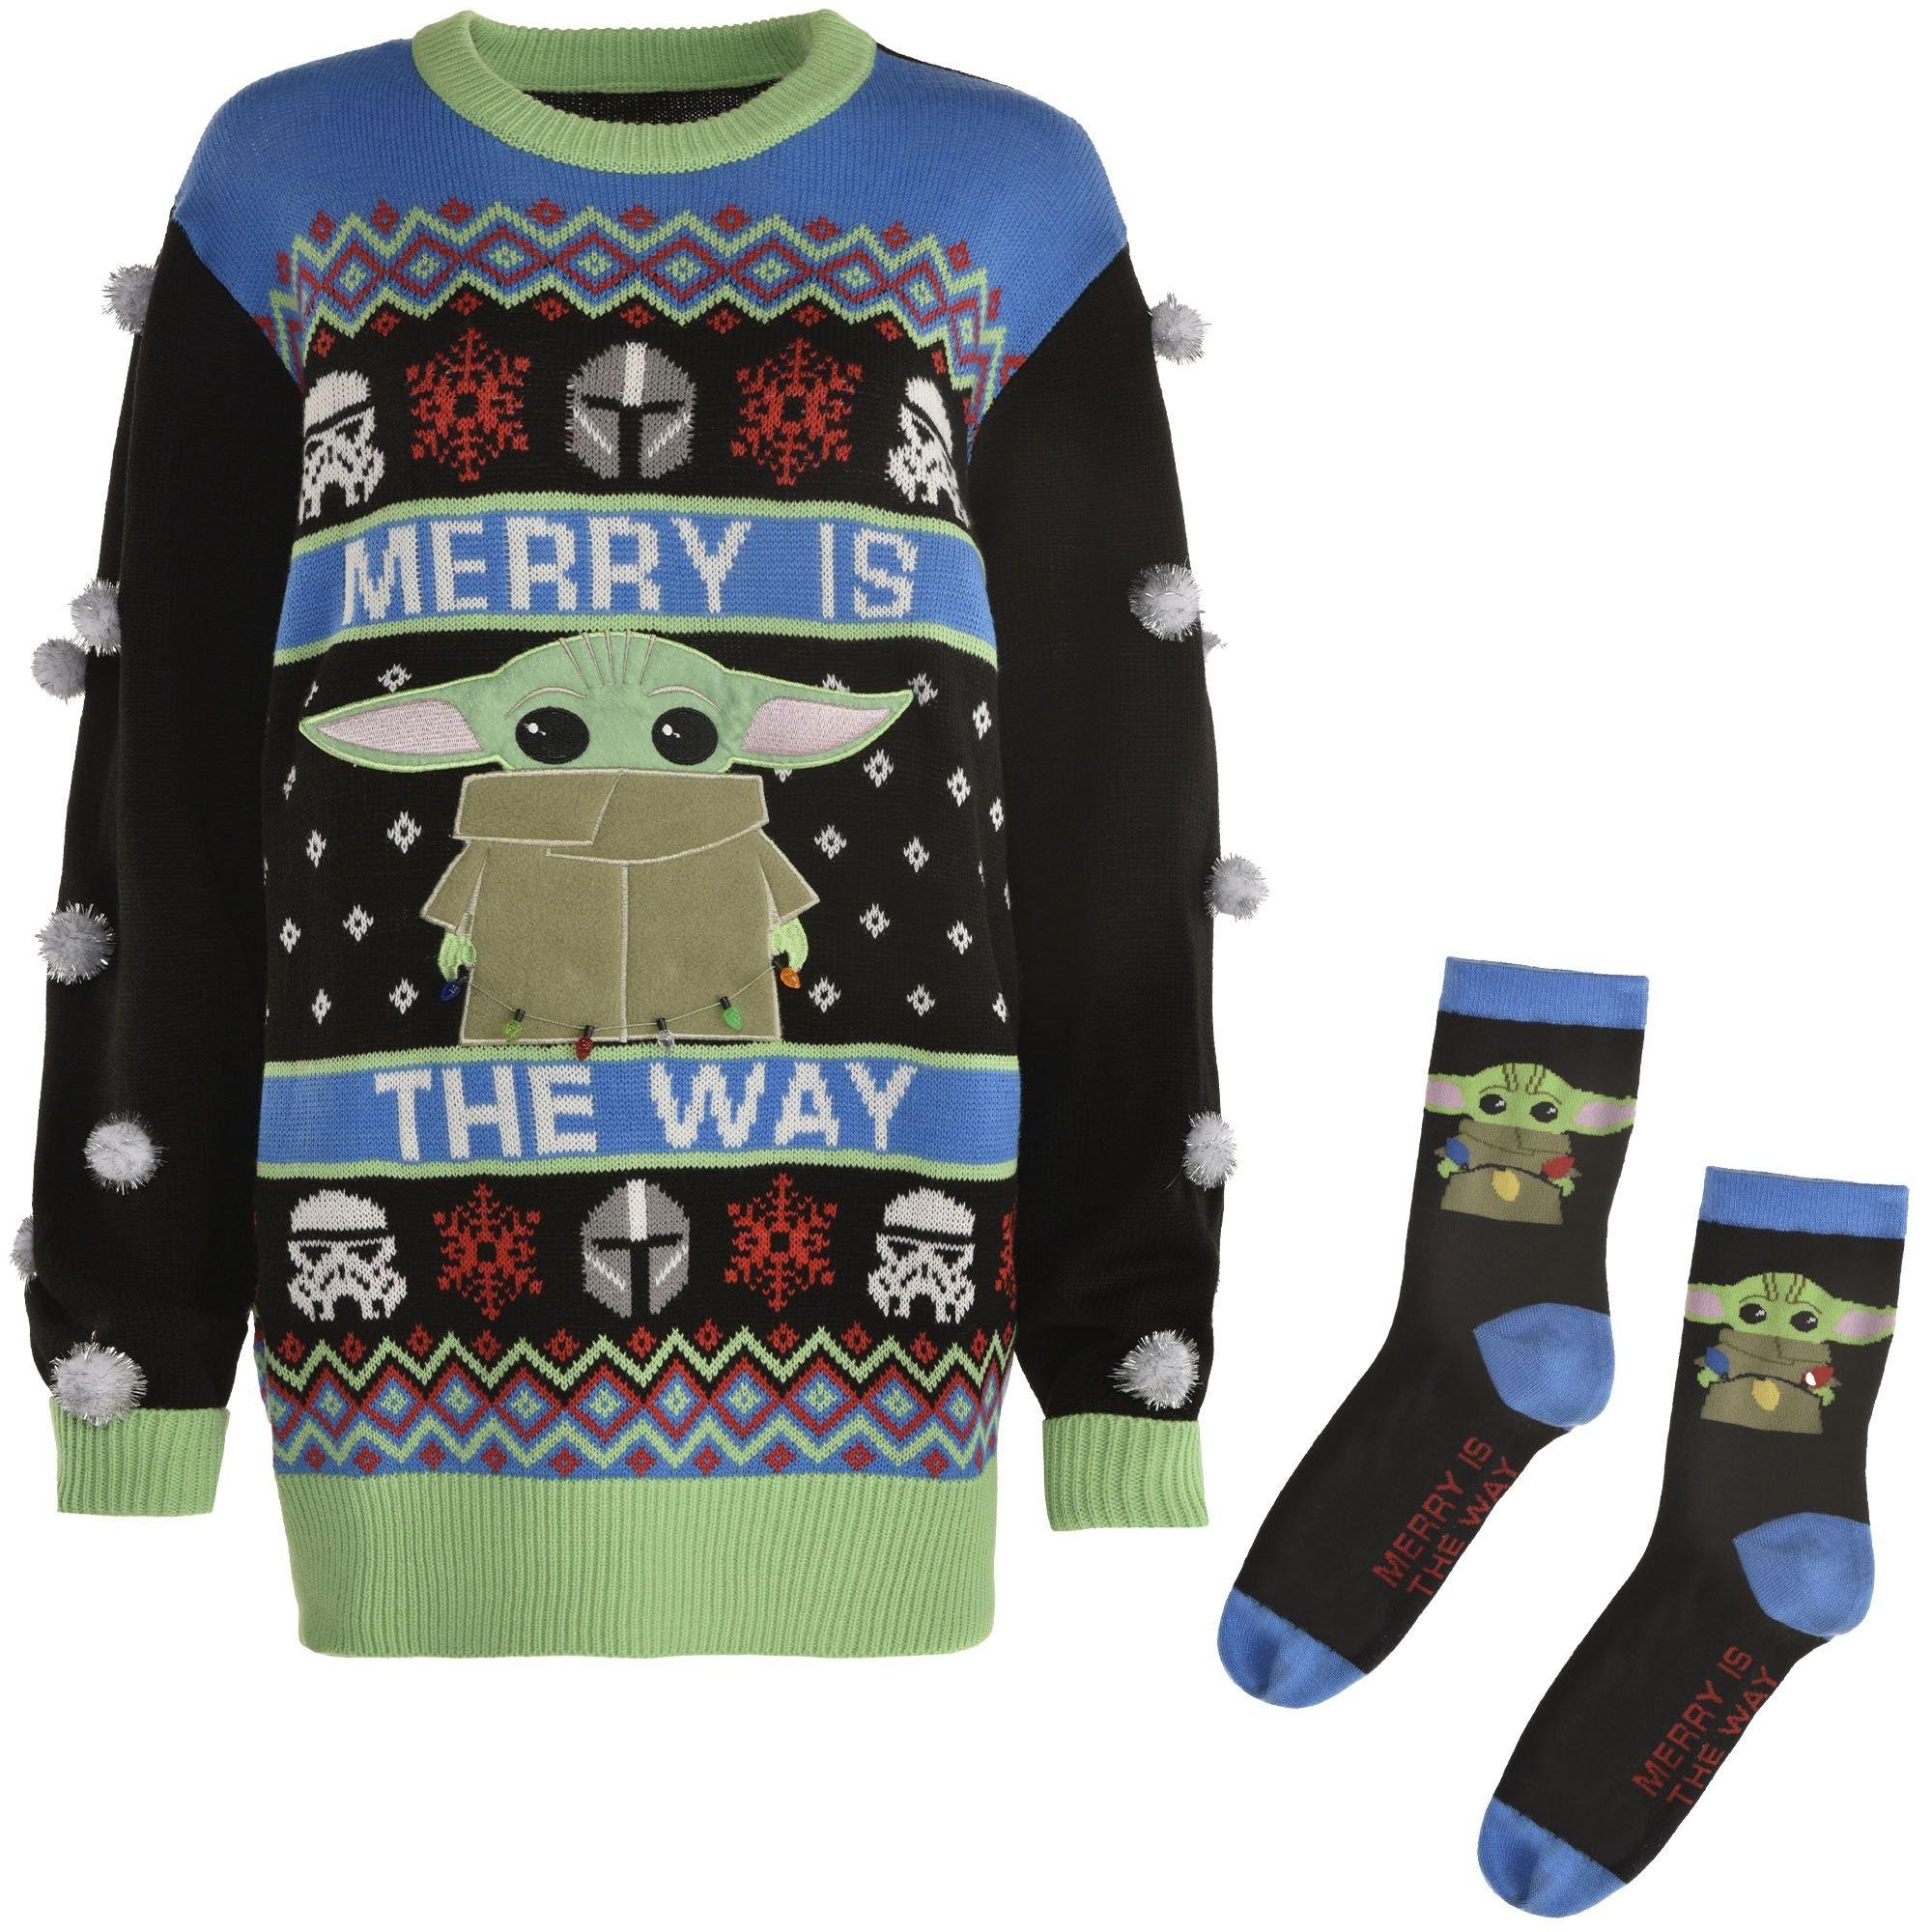 Adult The Child Ugly Christmas Sweater with Socks - Star Wars Mandalorian | Party City